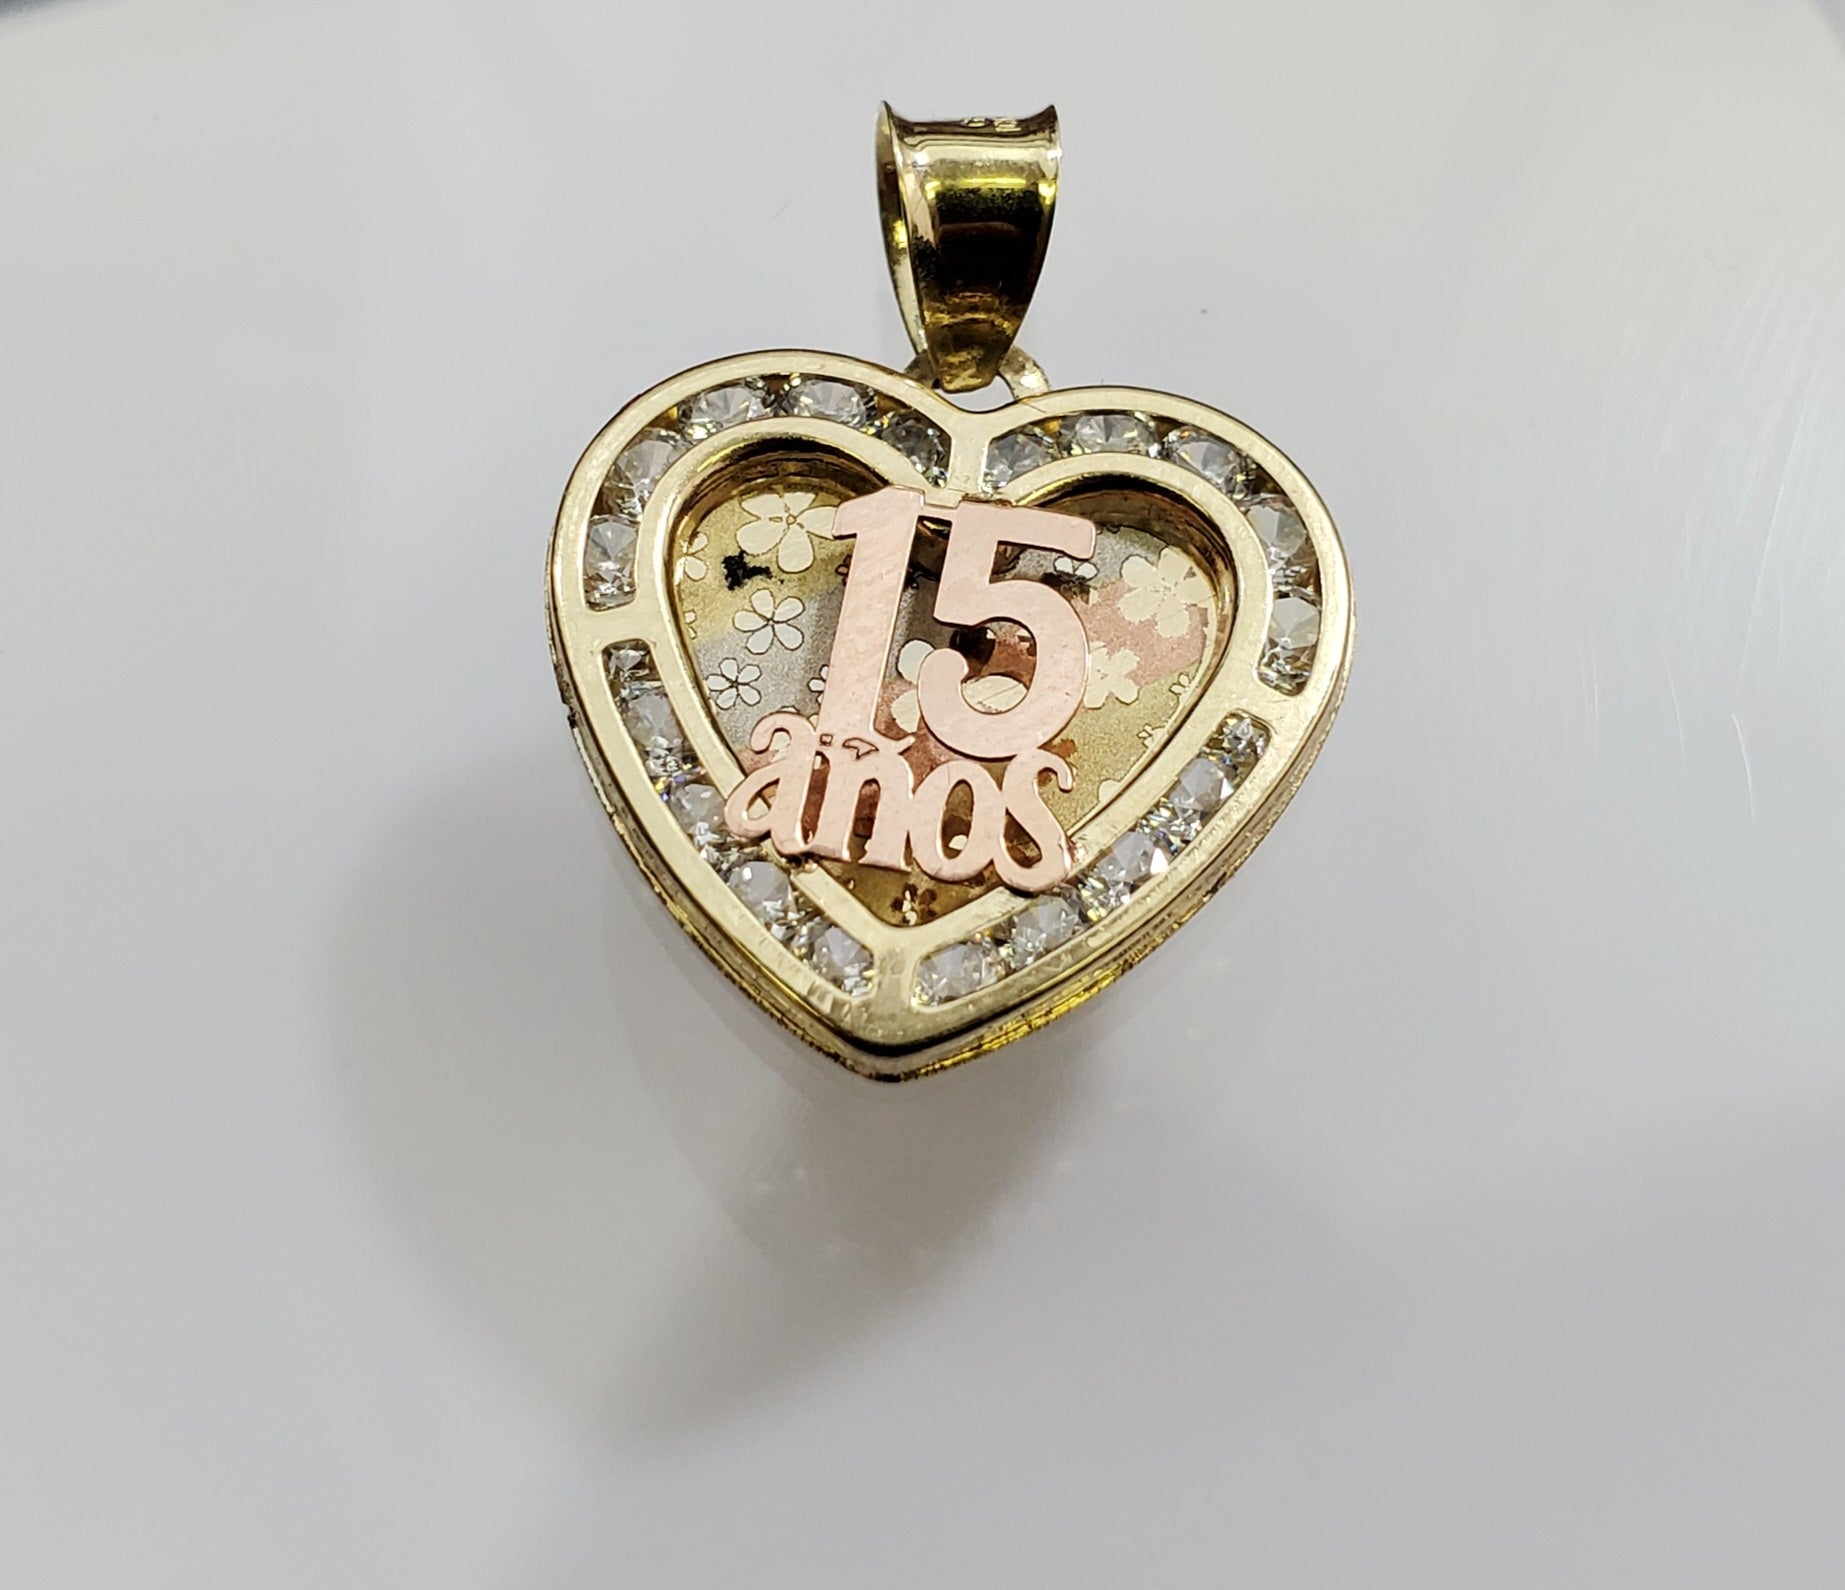 10K Solid Real Yellow Gold 15 Anos Heart Cz Pendant Charm with Box Chain